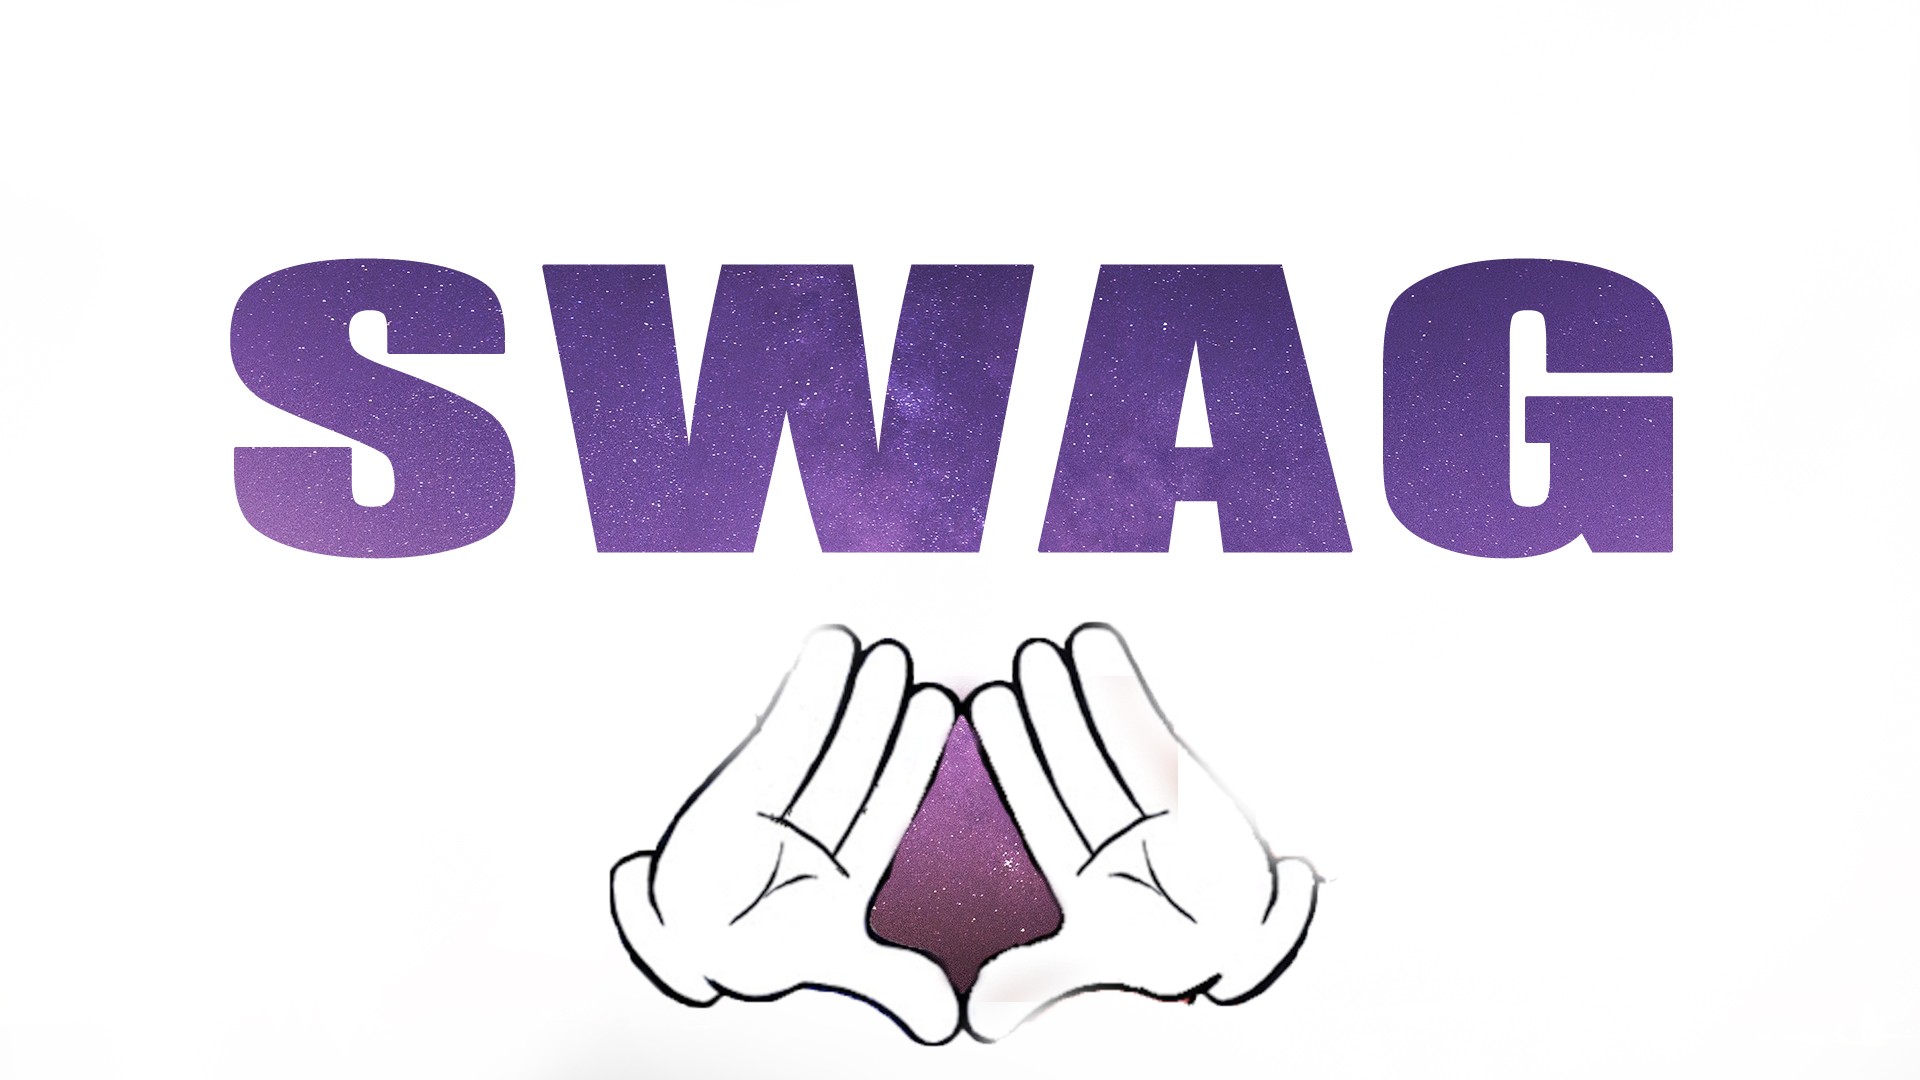 General 1920x1080 hands purple white background typography